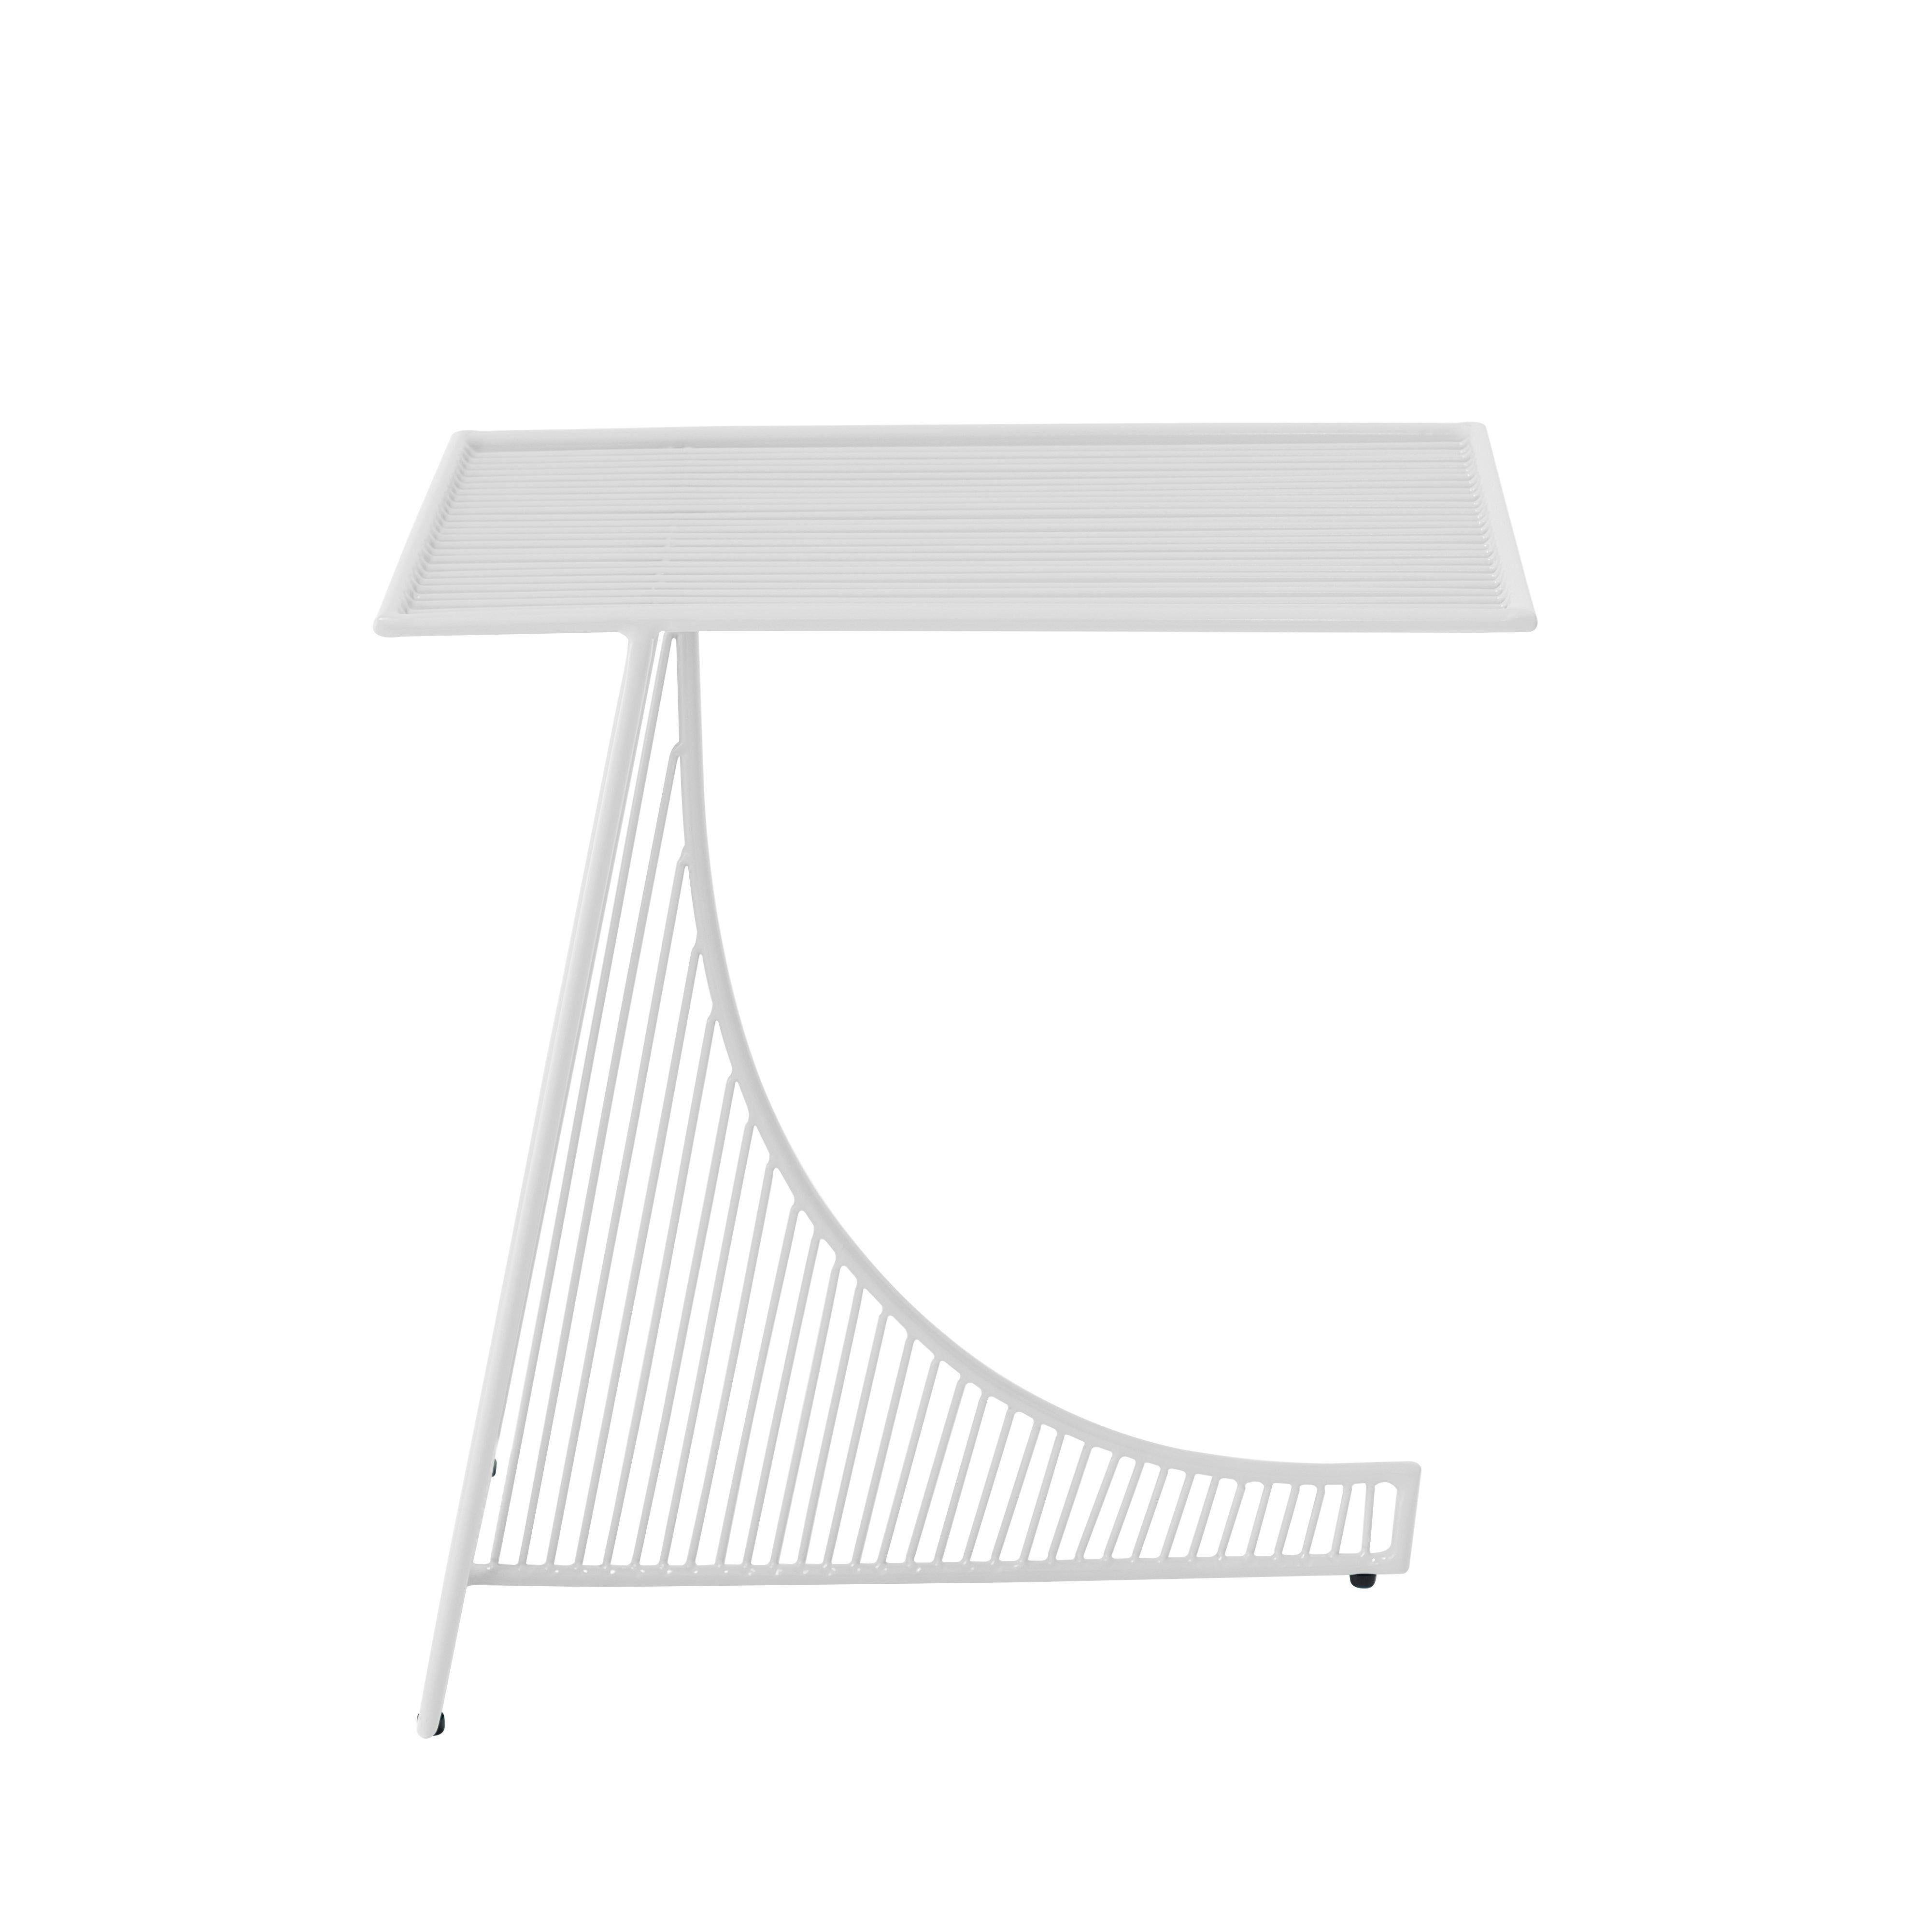 The unique curved shape sets this contemporary wire table apart. Get comfortable and pull this table close to a chair or sofa for an ideal relaxed work space. The modern shape compliments a garden or contemporary interior, and the terrazzo top adds